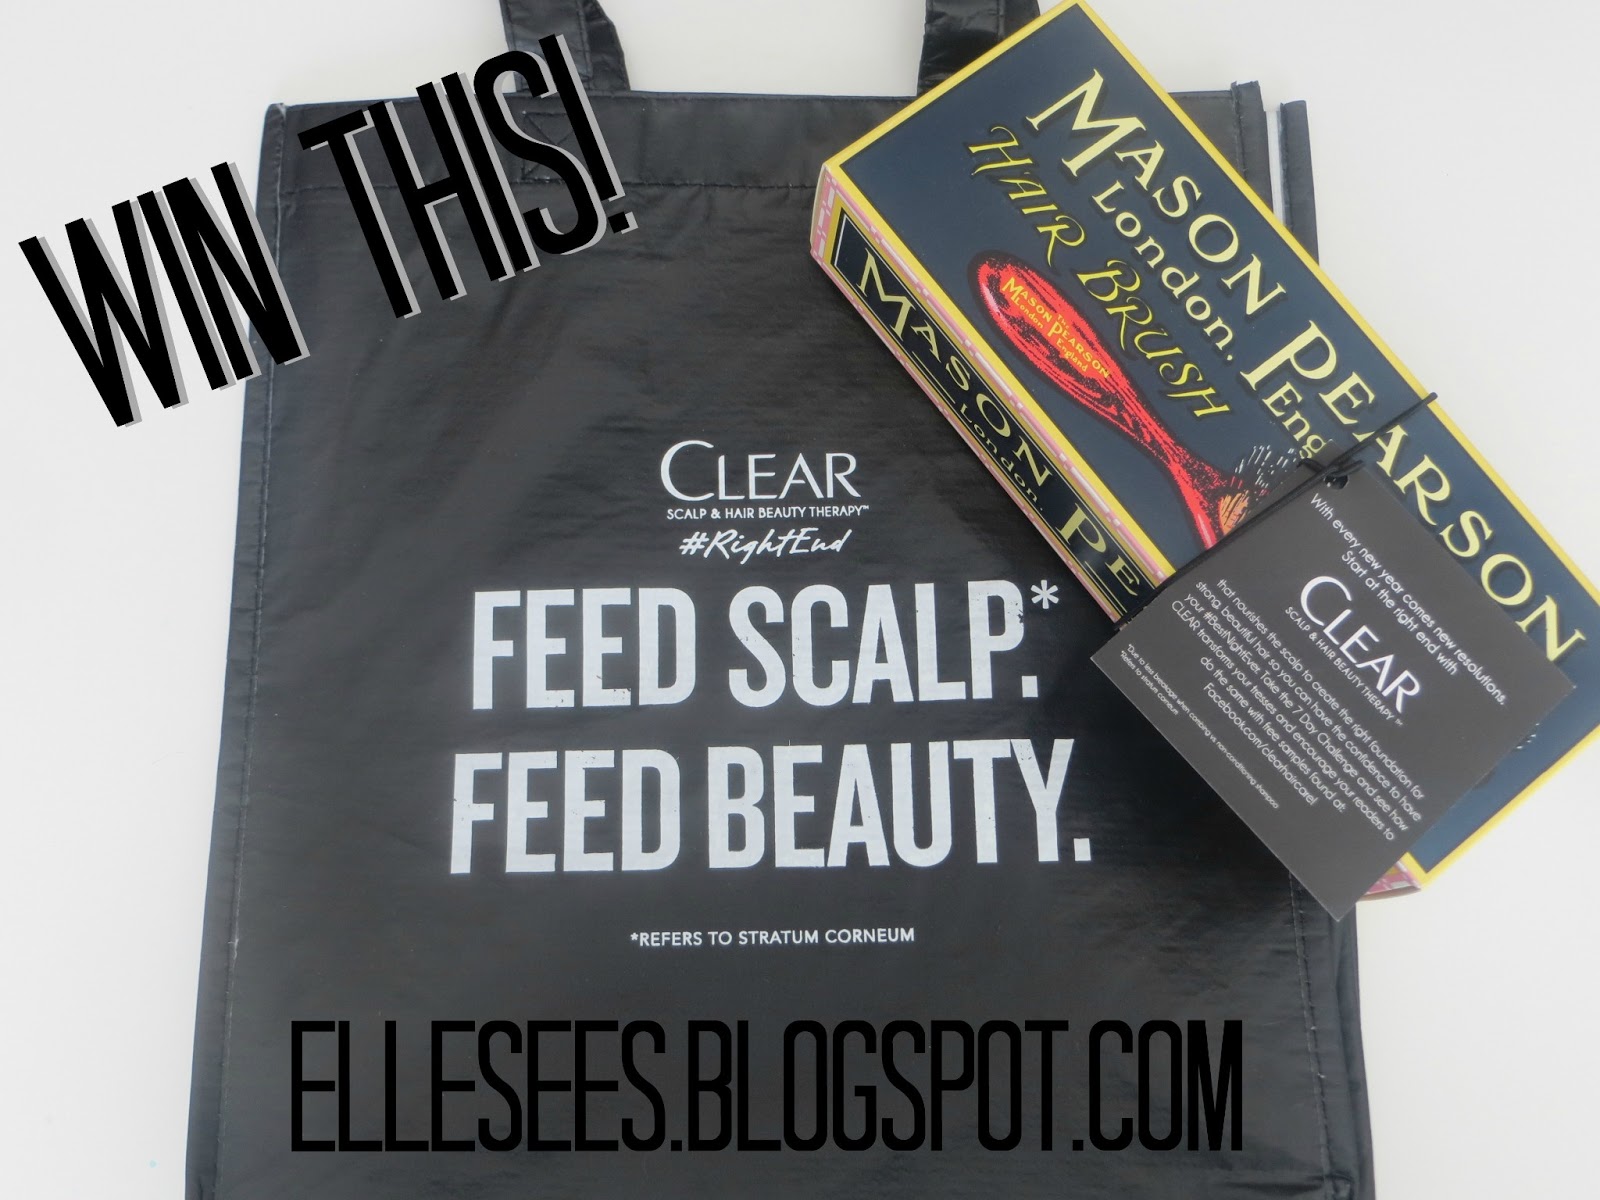 Elle Sees|| Beauty Blogger in Atlanta: Product Test Drive 